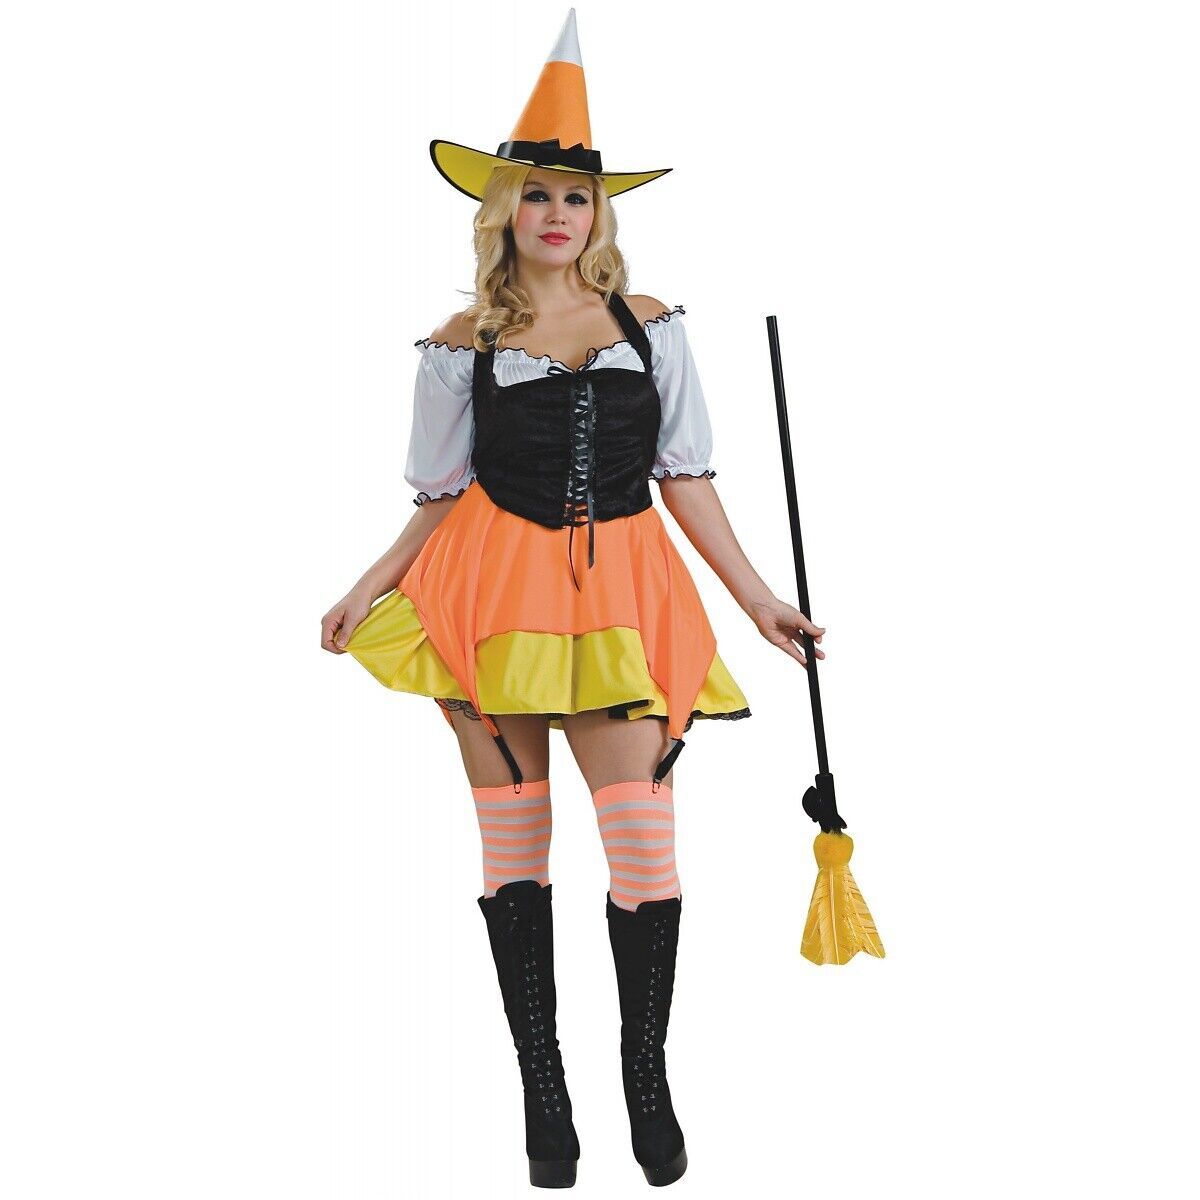 Ebd Products - Candy corn witch costume adult plus size halloween fancy dress